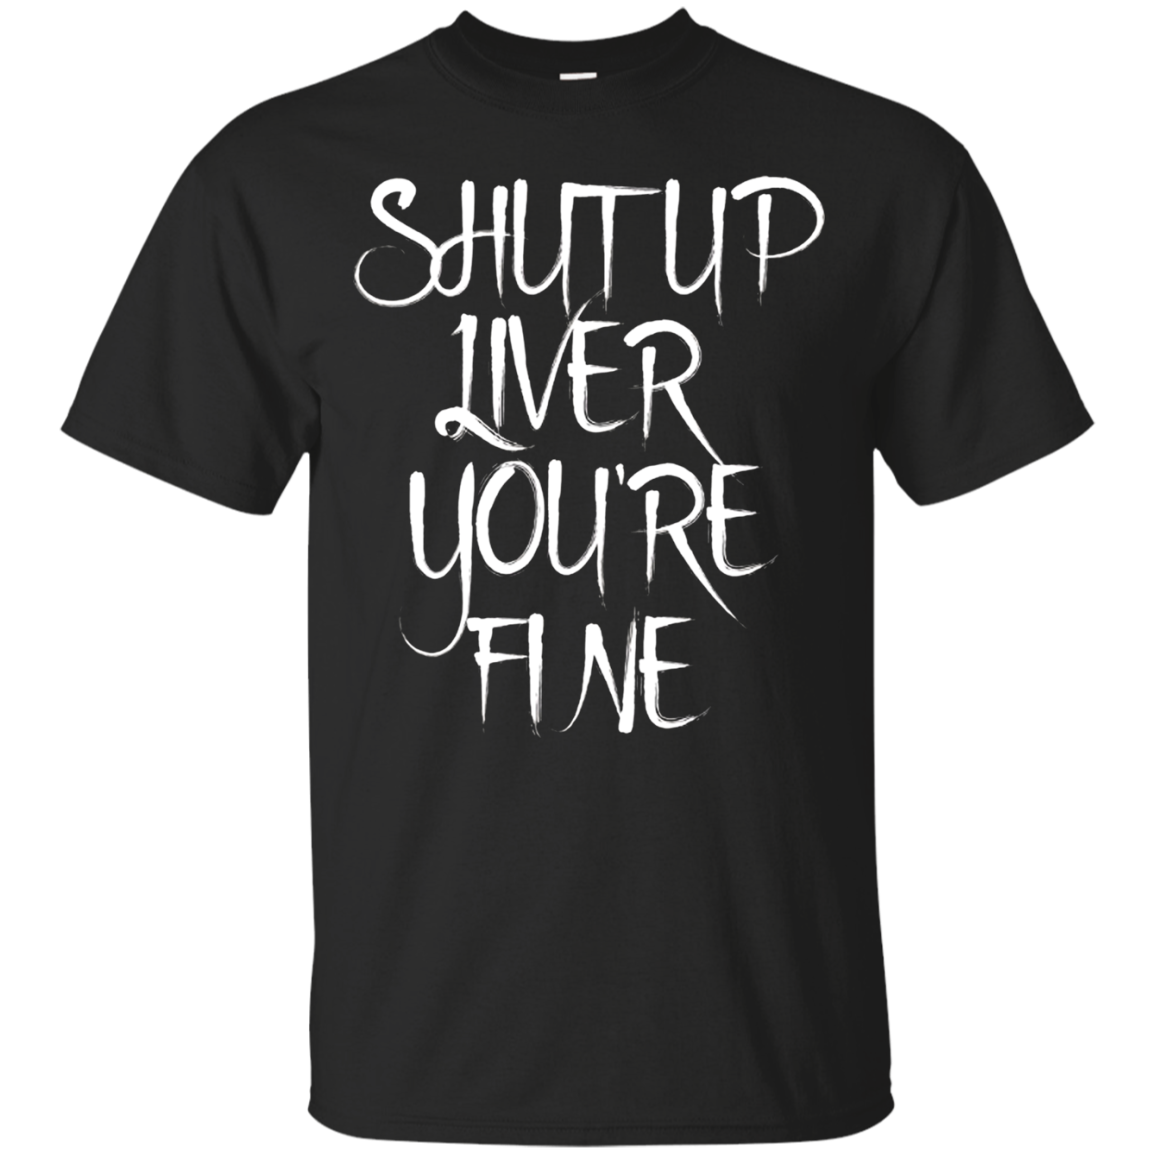 Shut Up Liver You're Fine Funny Drinking Shirt - Amyna